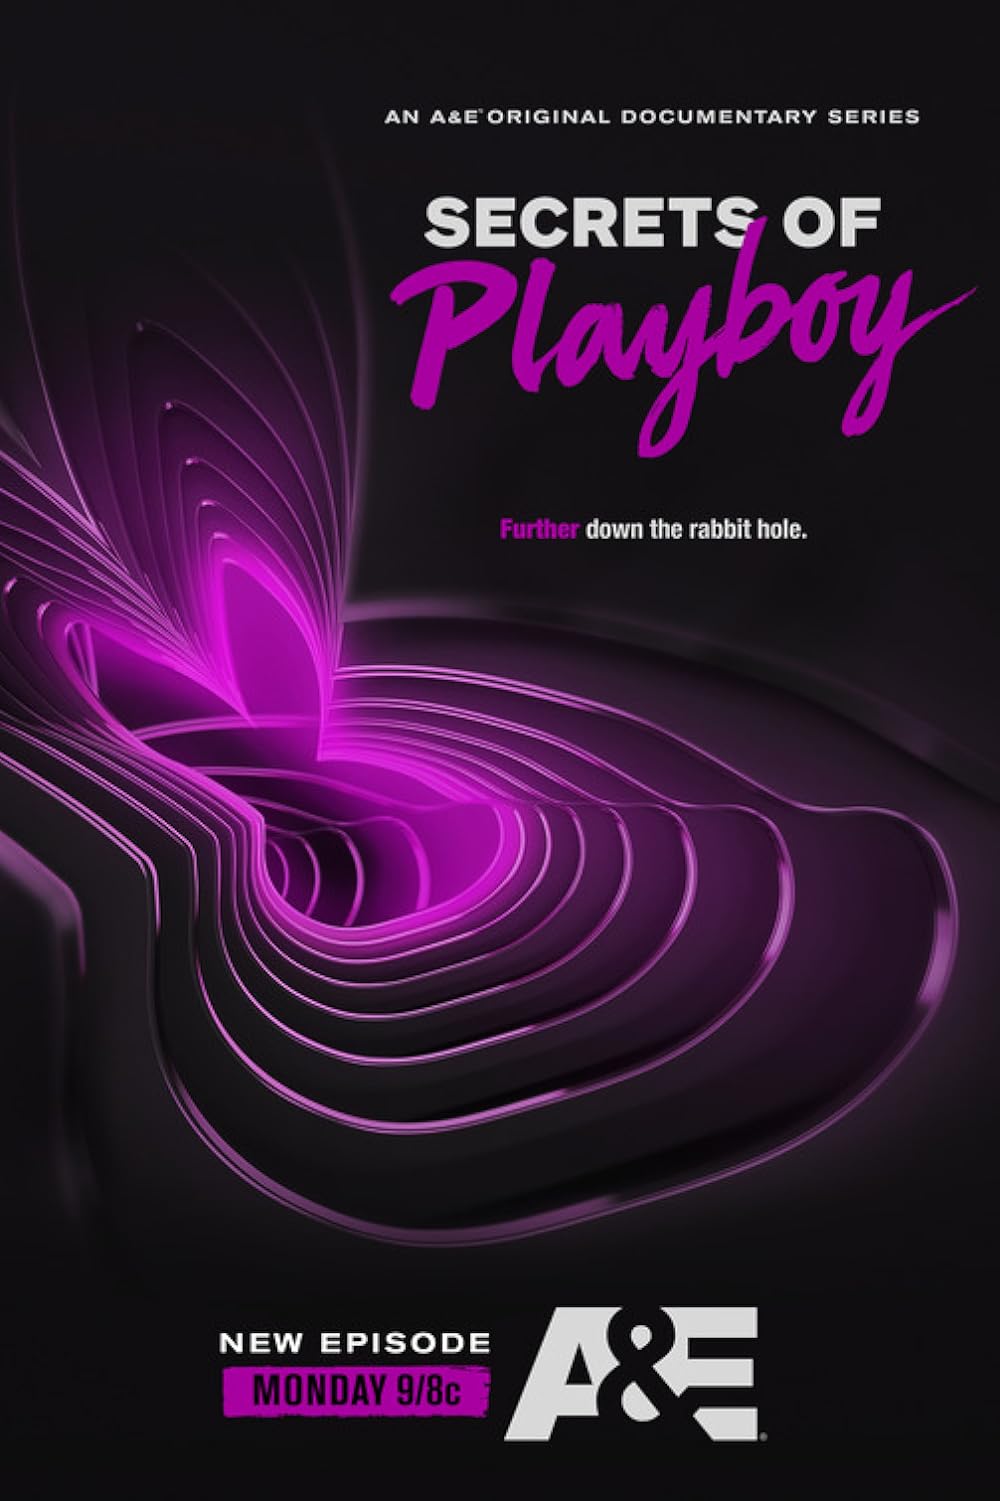 dondon marquez recommends Playboy Full Movies Online